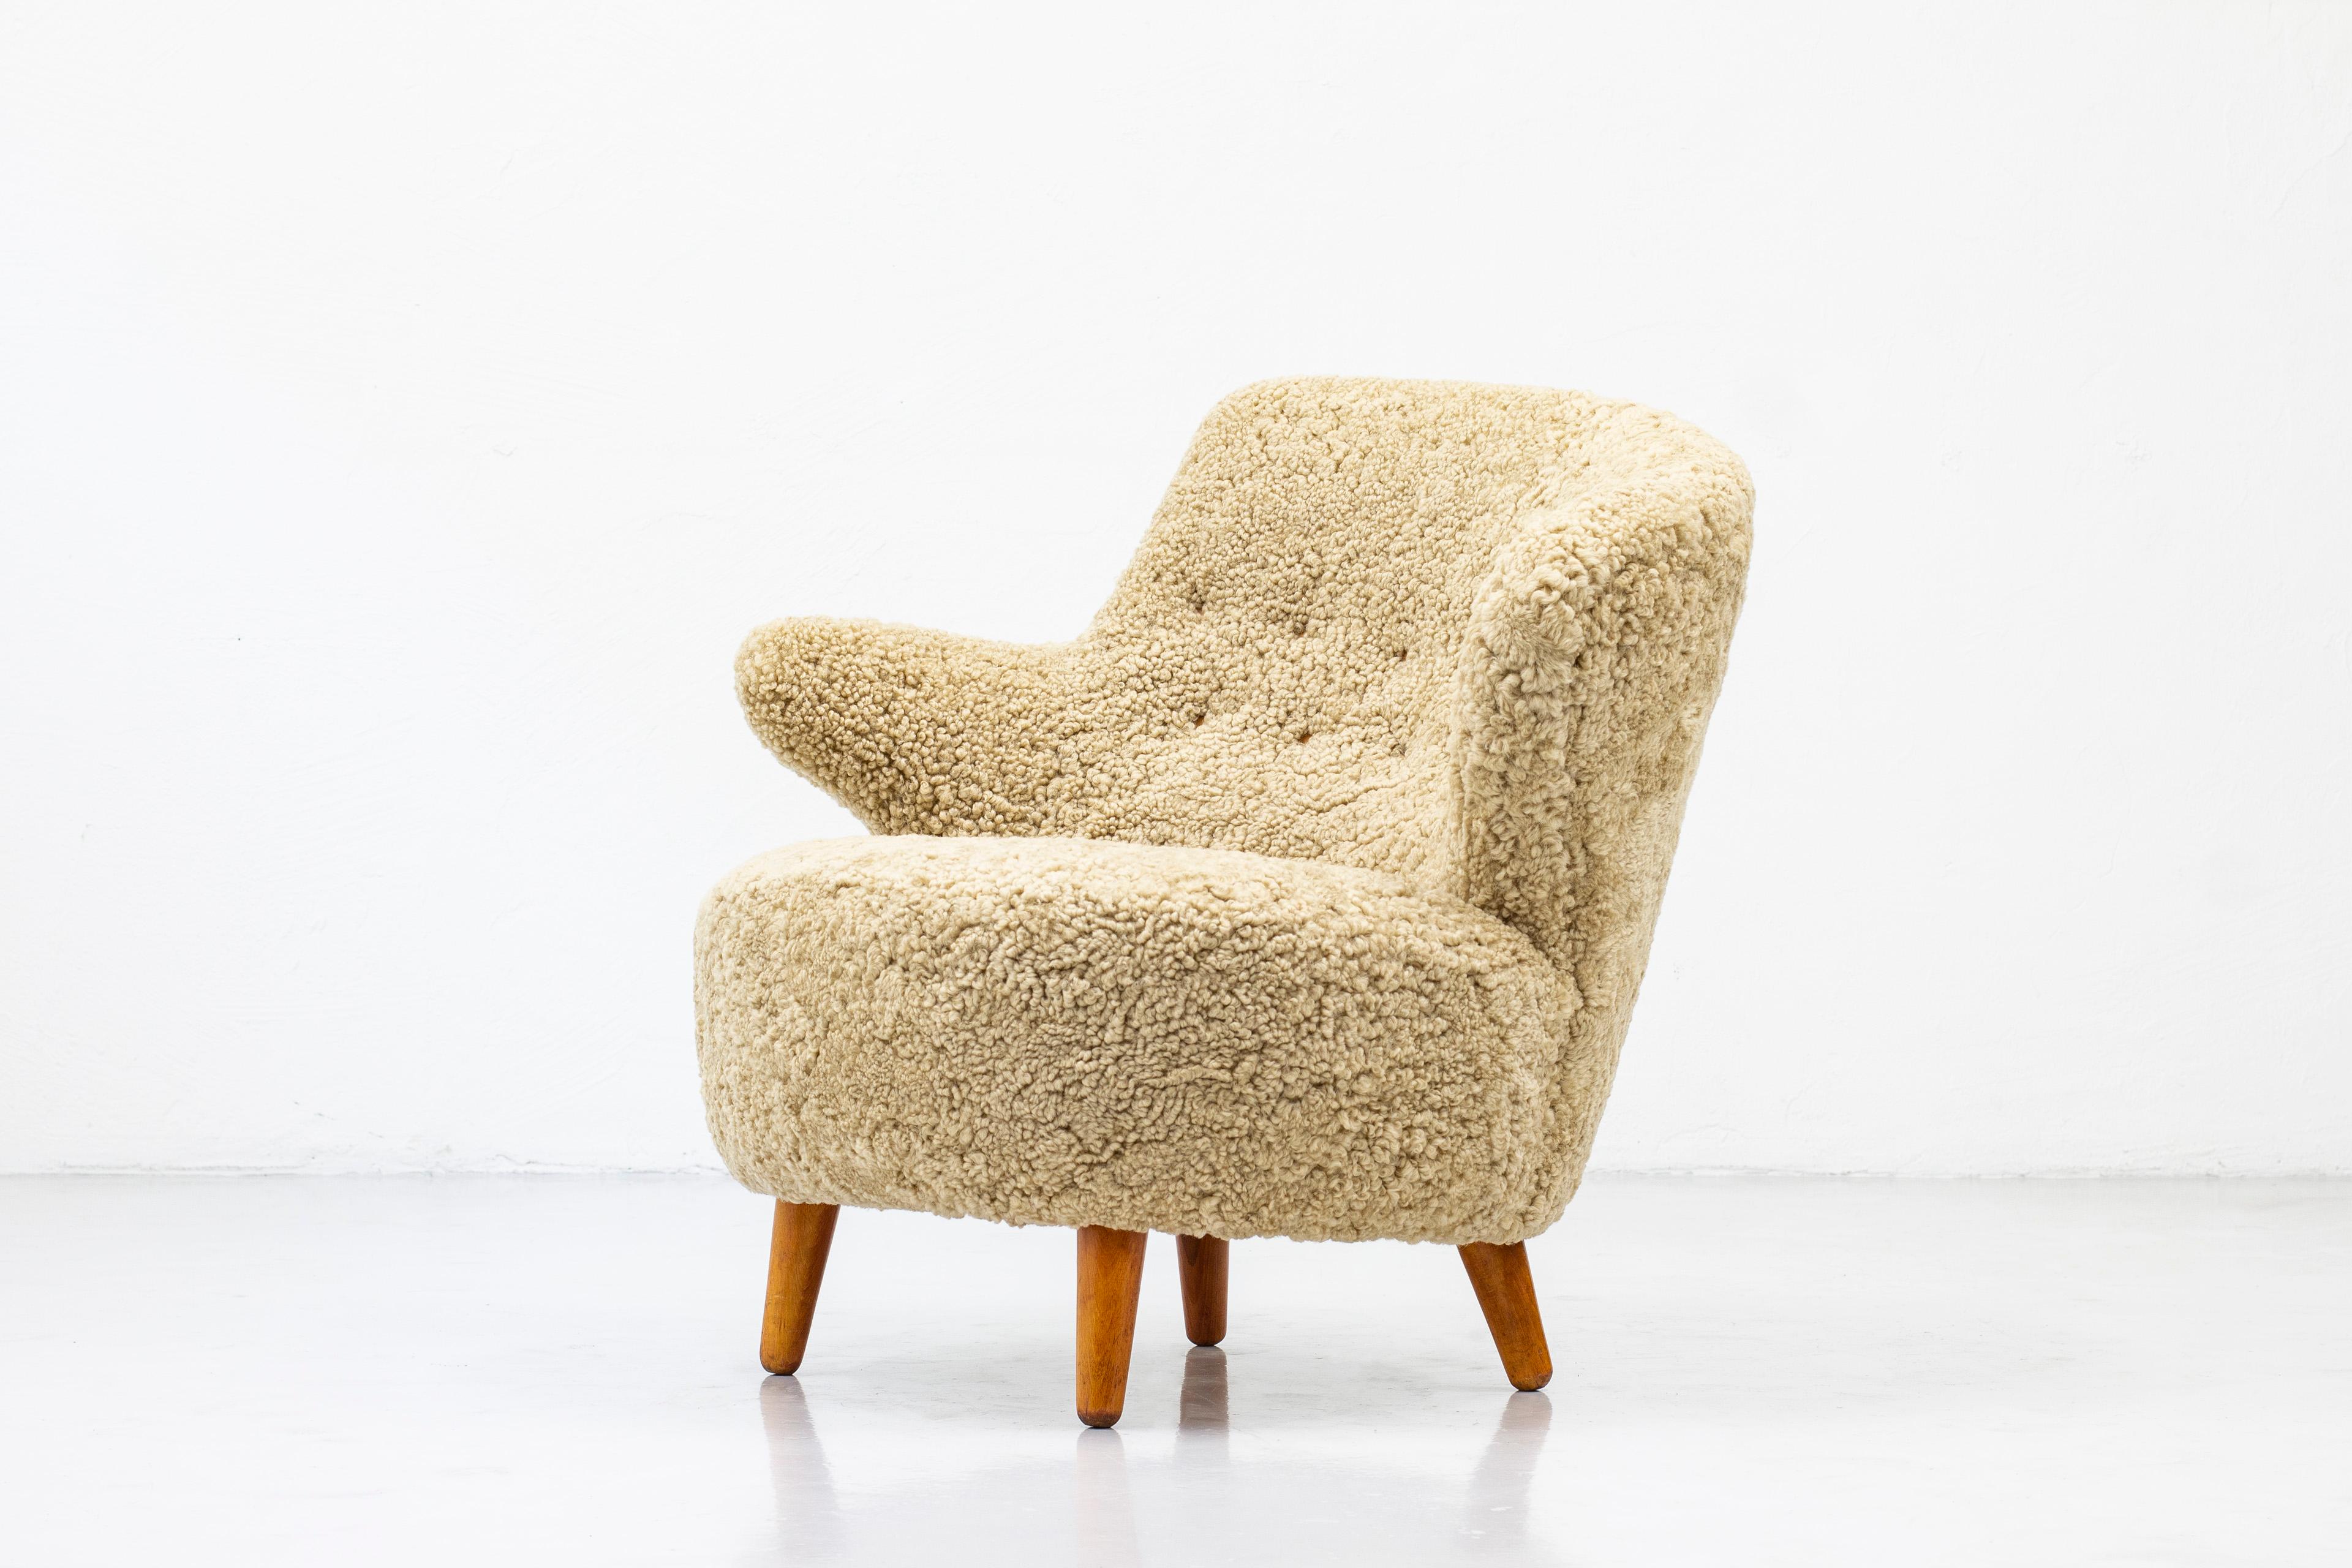 Very rare asymmetrical lounge chair produced by Norwegian company Vik & Blindheim. Made in Norway during the early 1950s. Legs made of beech wood and new upholstery in honey colored shearling fur, with cognac leather buttons. Signed with original